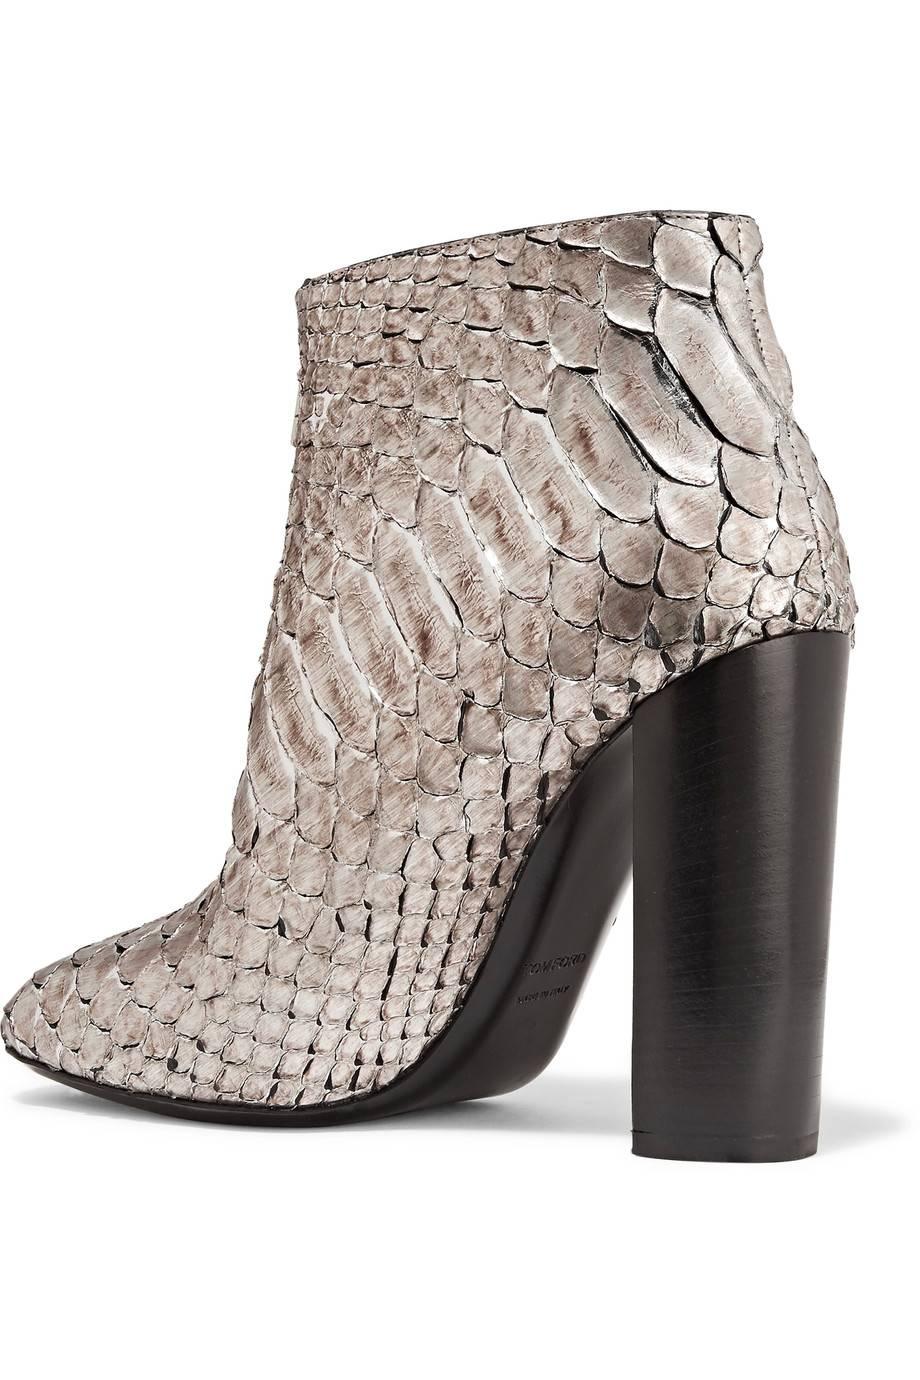 Tom Ford NEW & SOLD OUT Gray Silver Snake Leather Chunky Ankle Booties in Box  1